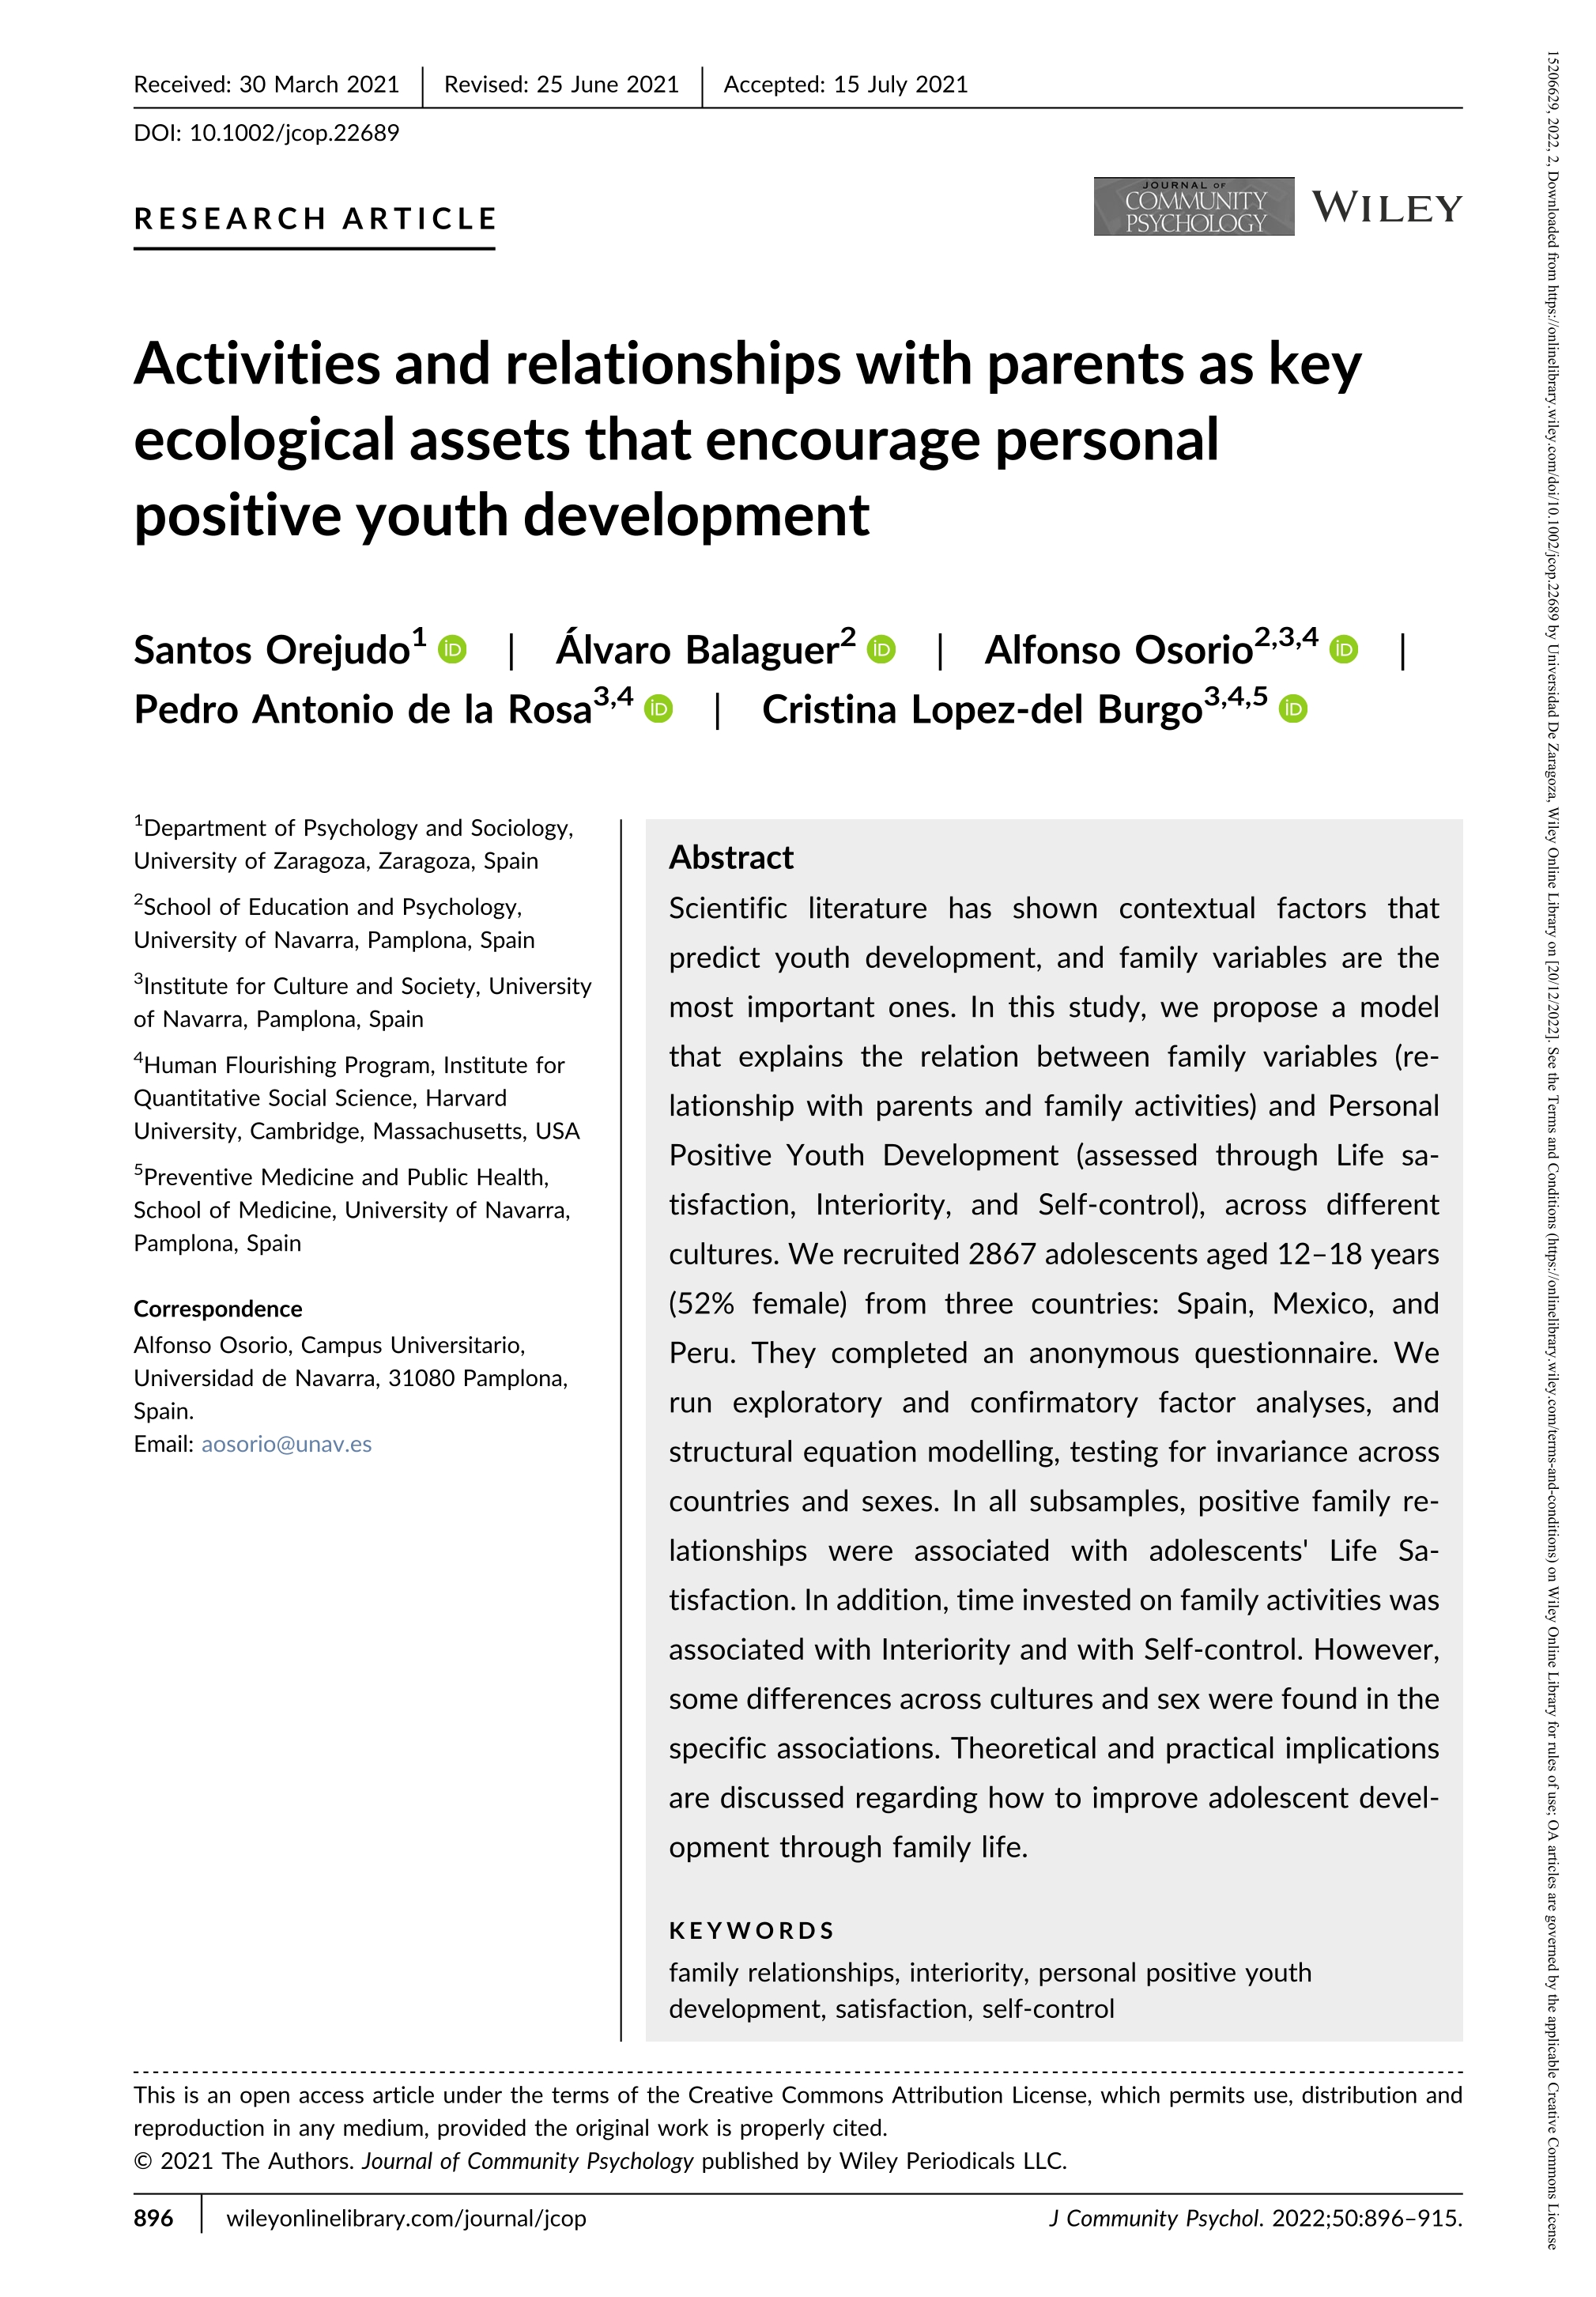 Activities and relationships with parents as key ecological assets that encourage personal positive youth development